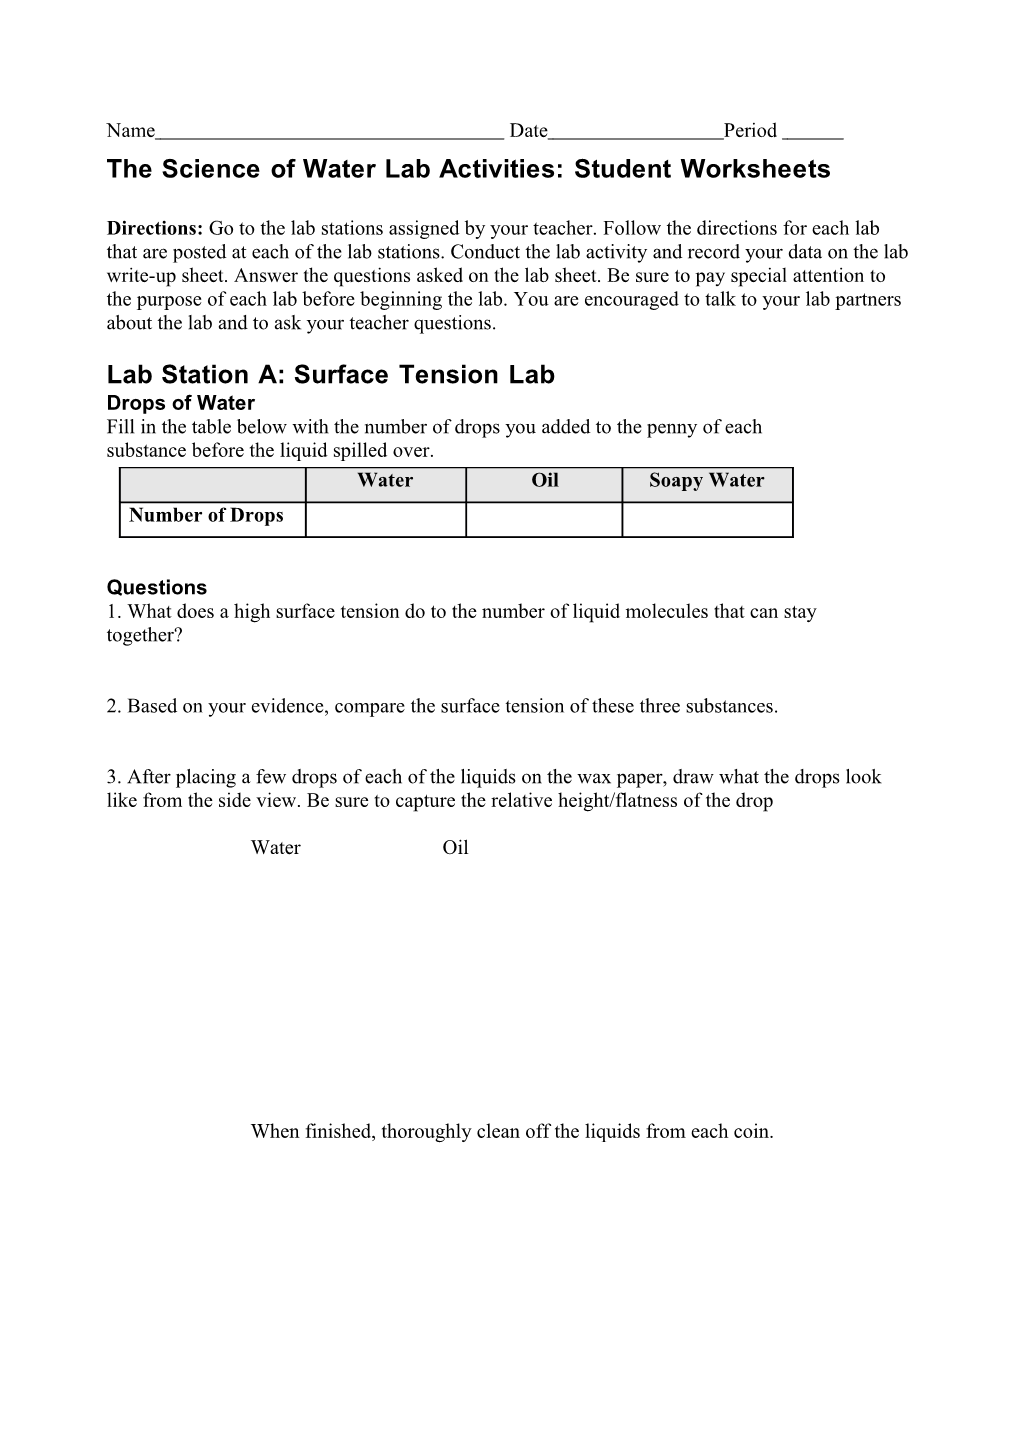 The Science of Water Lab Activities: Student Worksheets